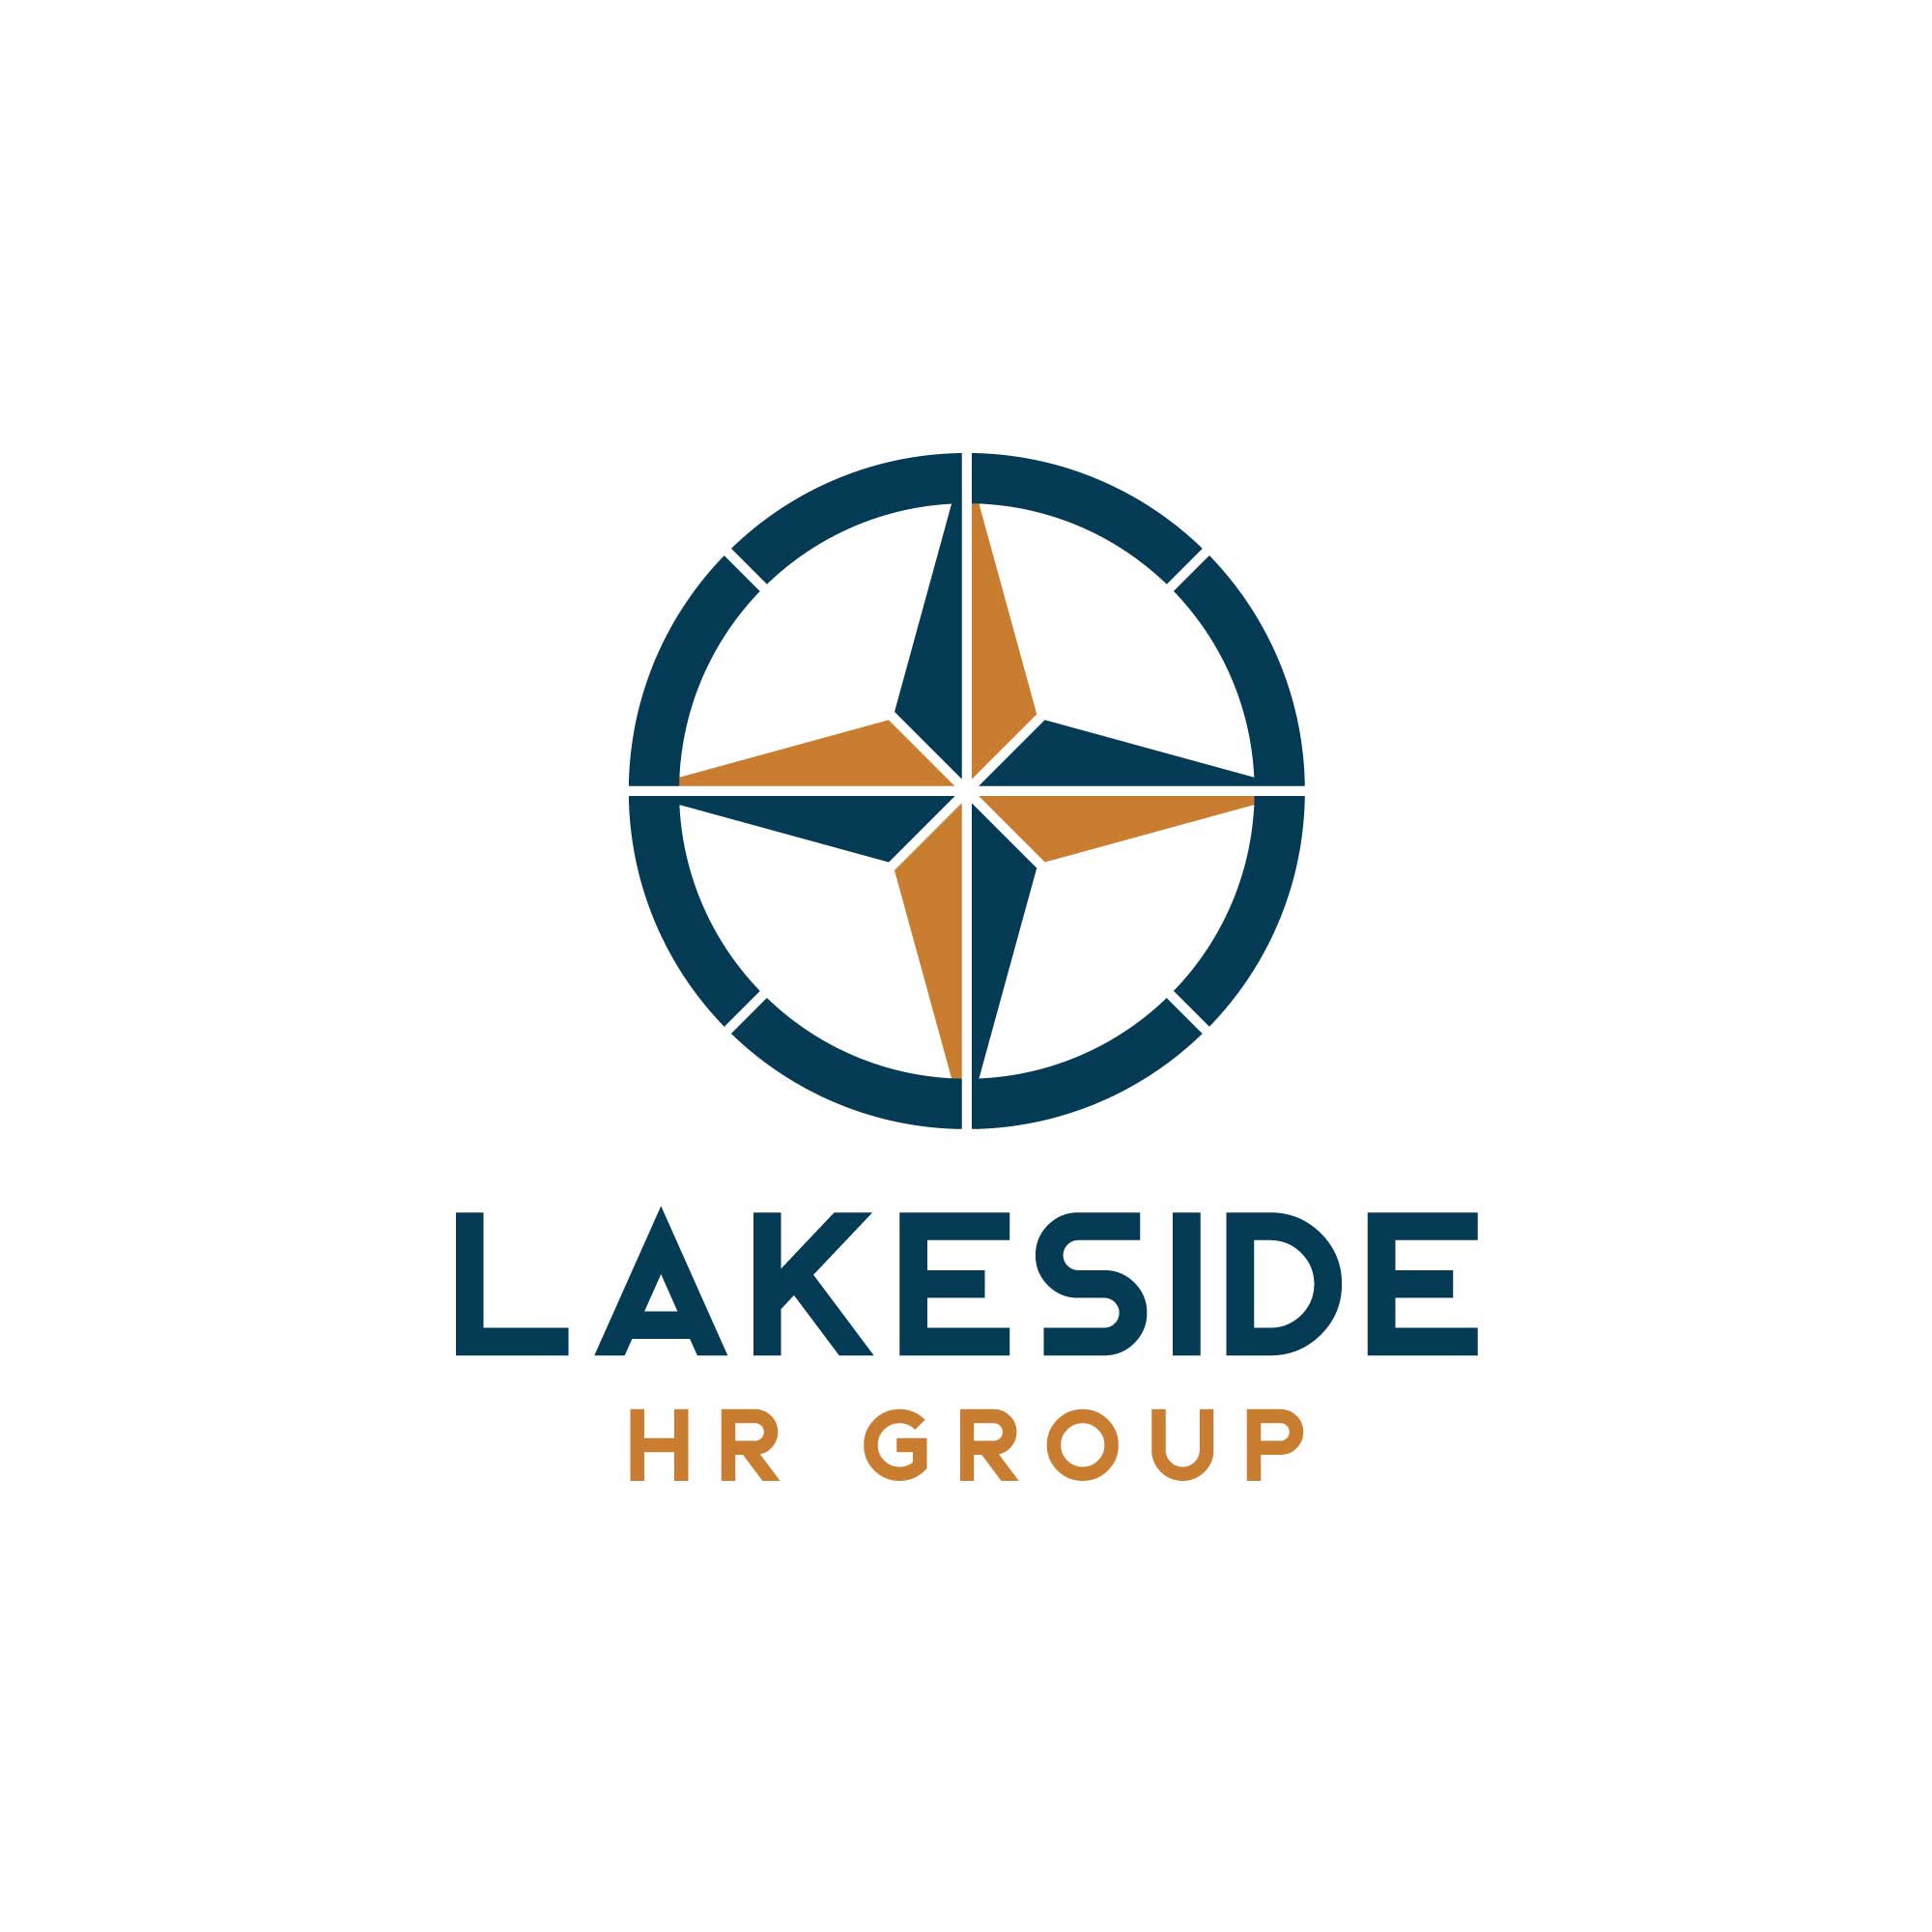 HR Consulting and Recruiting Company